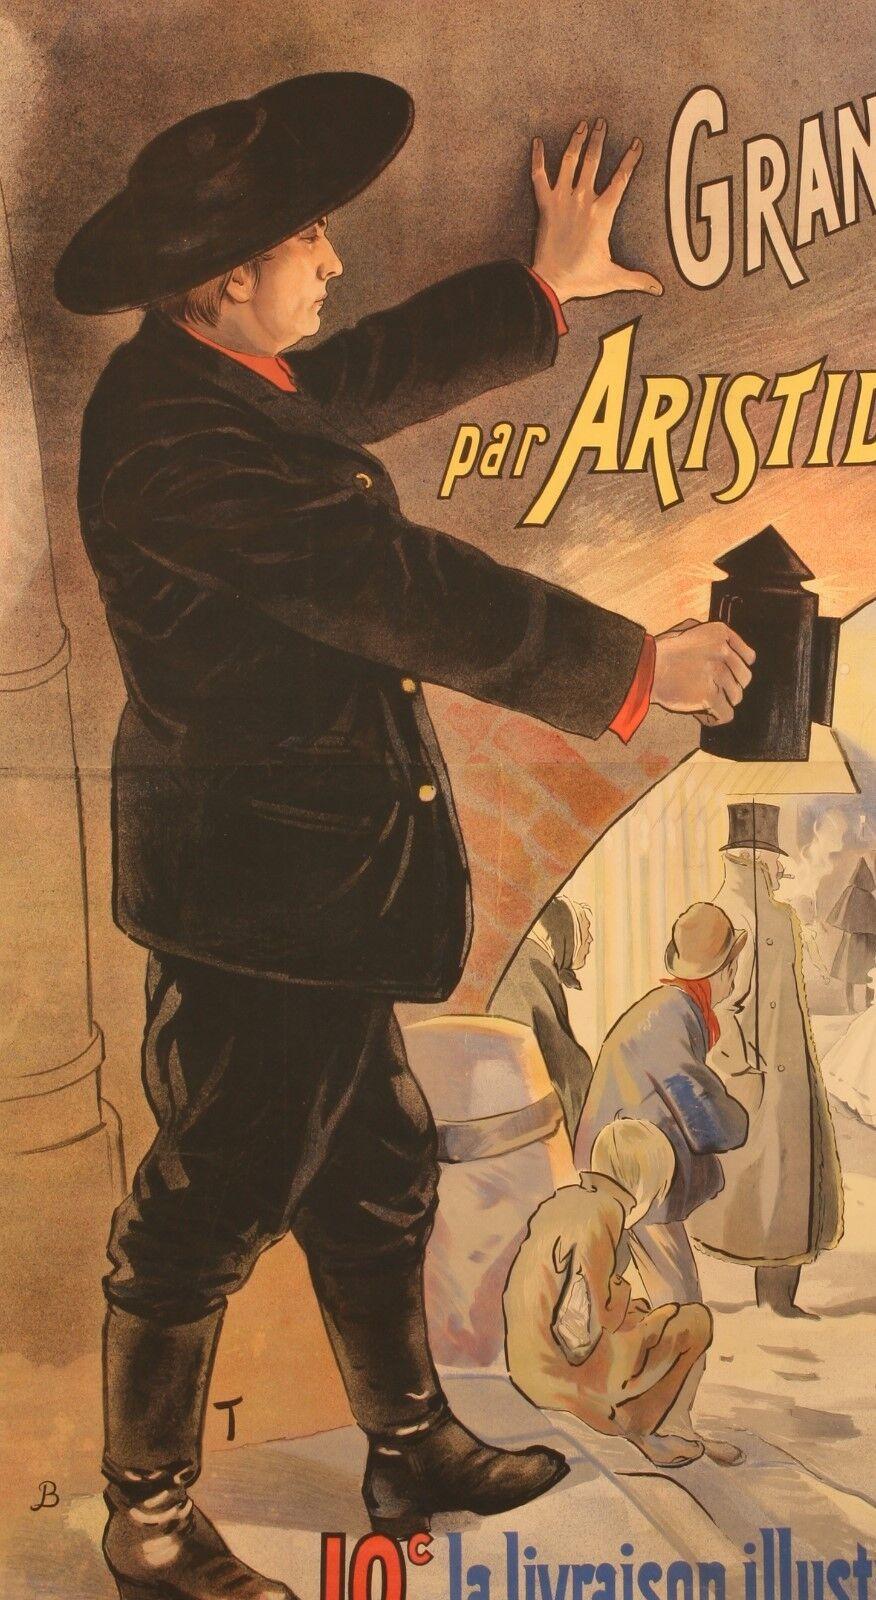 Original Vintage Poster-Bas funds of Paris-Aristide Bruant-Lautrec, 1895

AToulouse-Lautrec inspired poster for the release of the book 